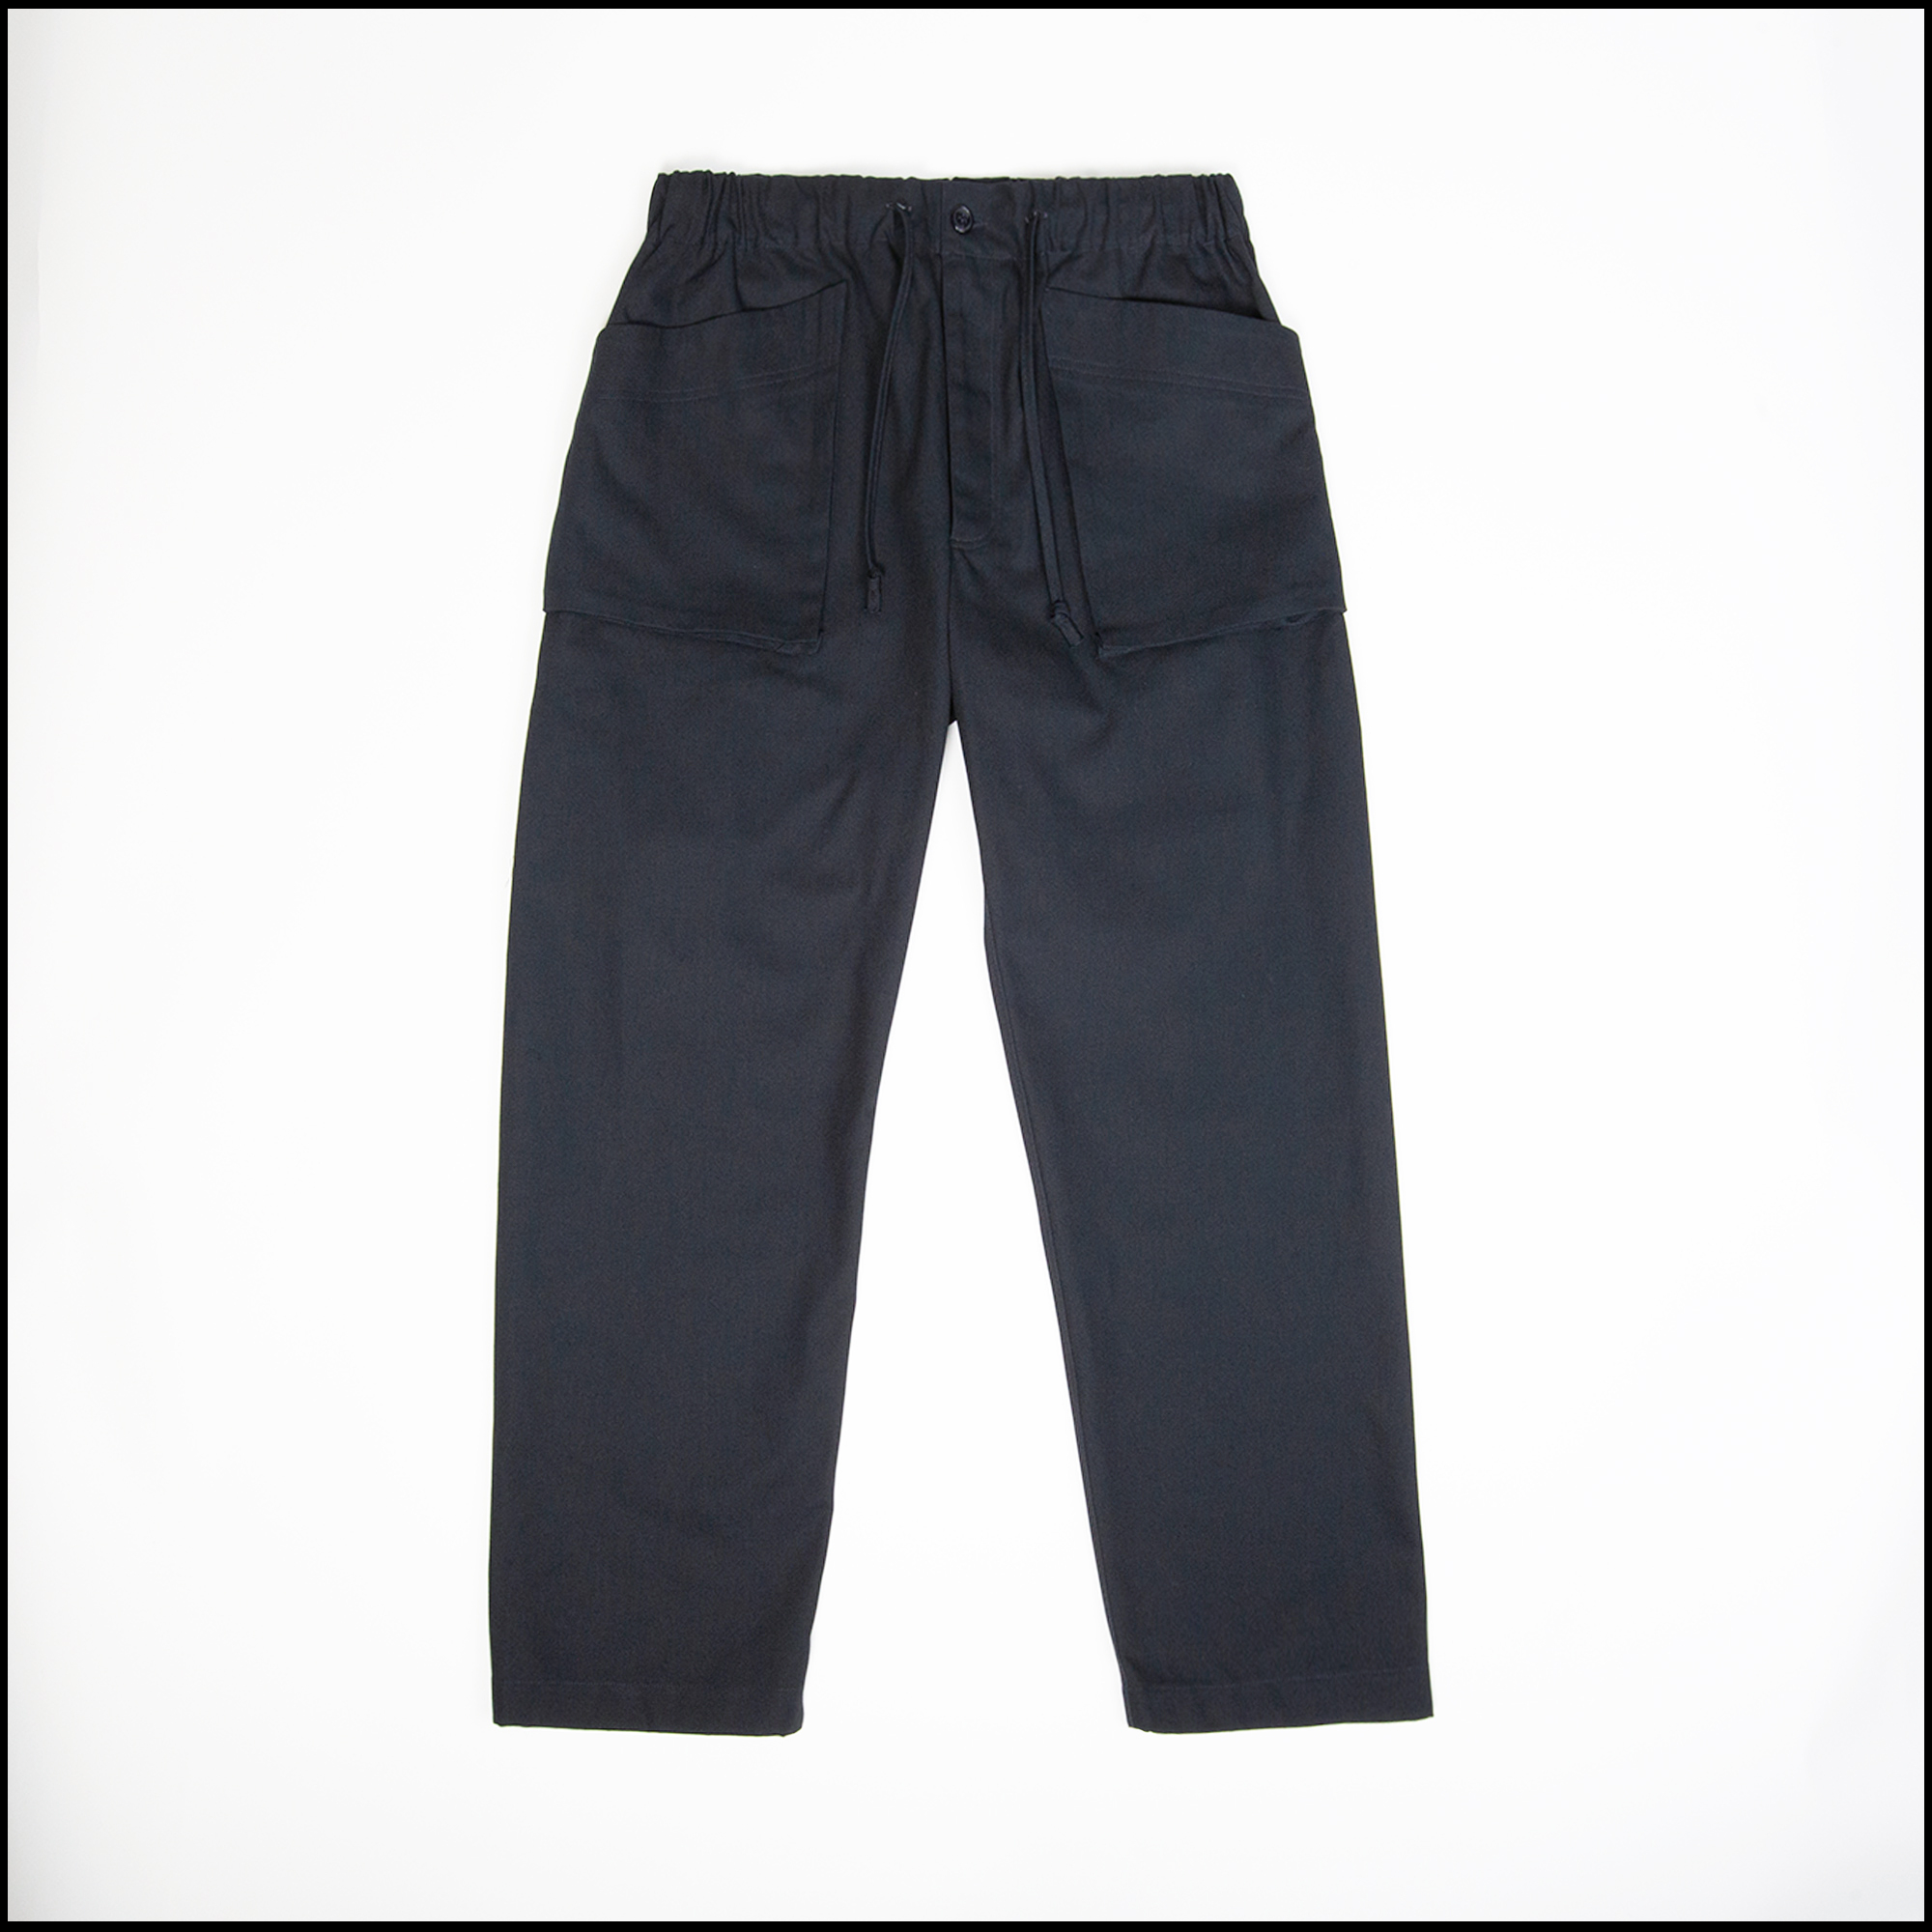 CARGO Pants in Midnight blue color by Arpenteur